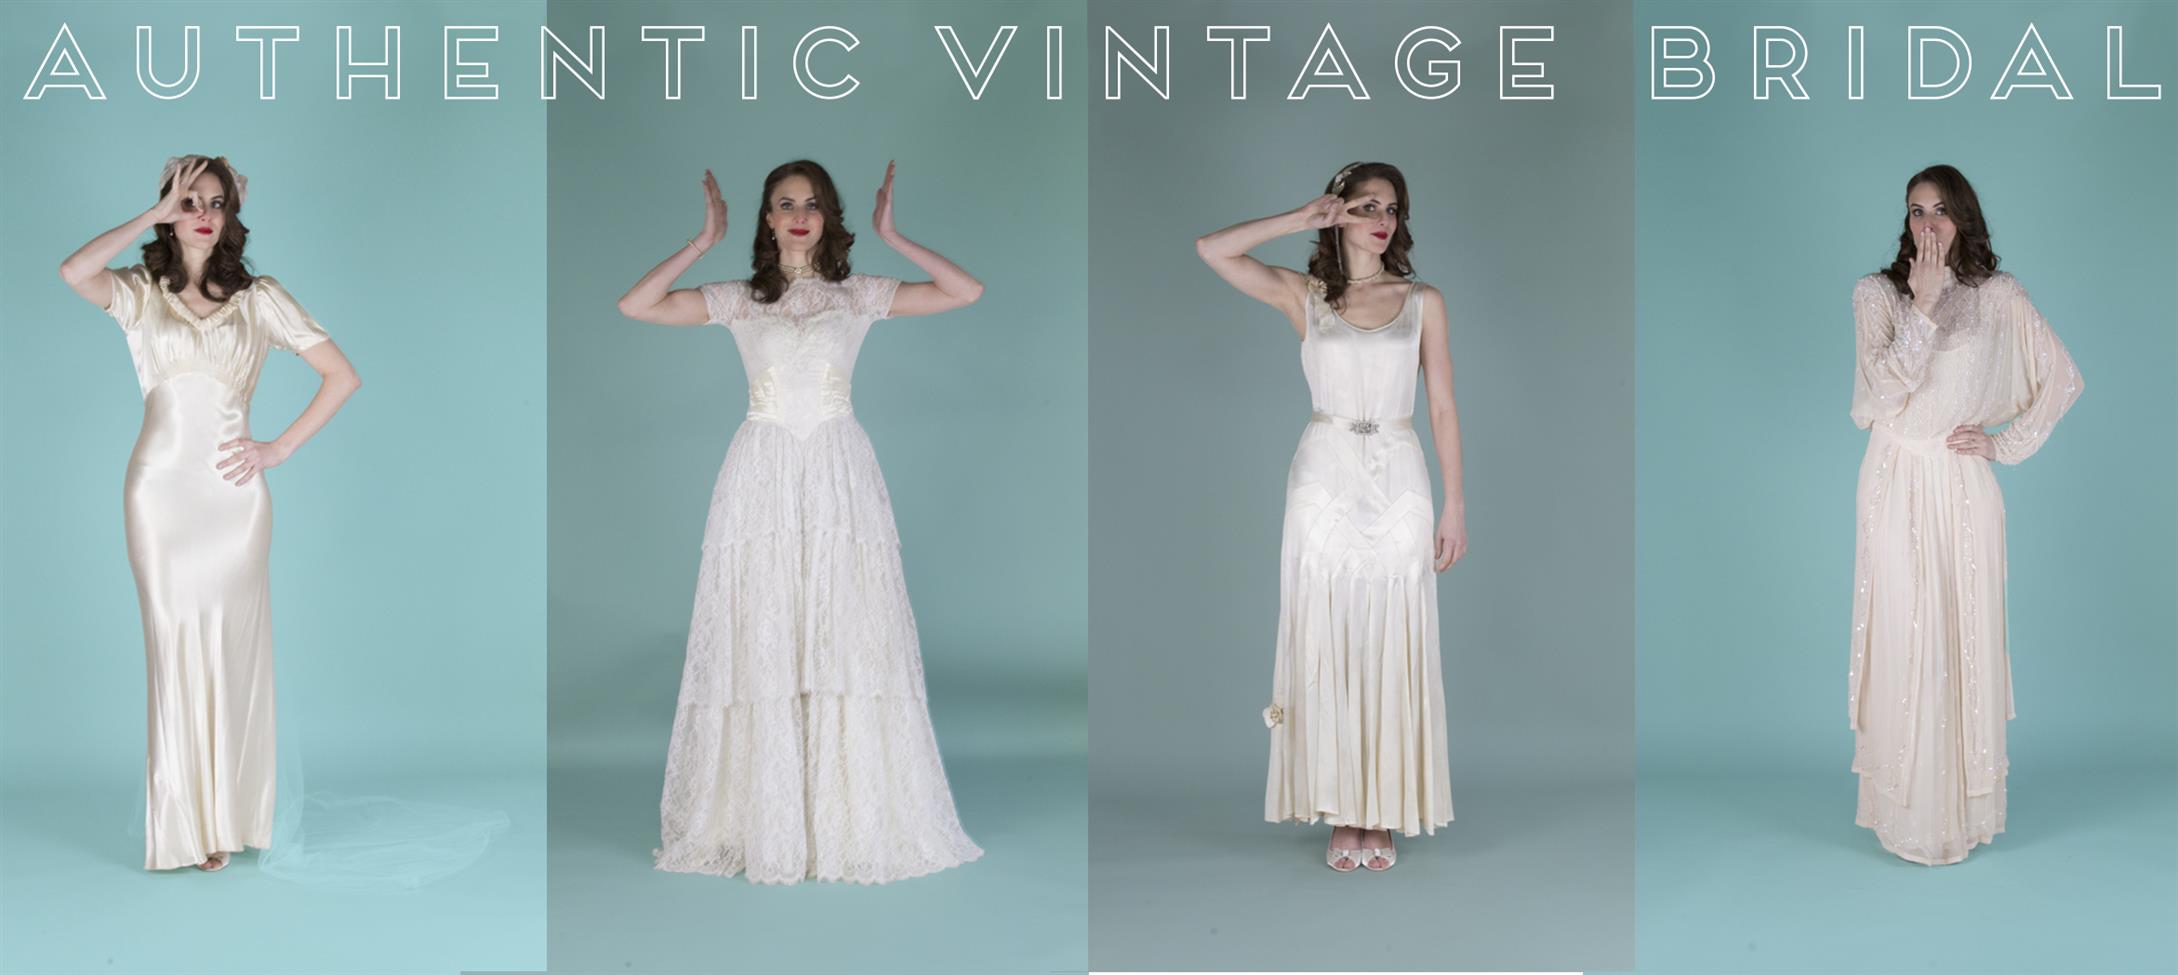 Dreamy Vintage Wedding Dresses from Authentic Vintage Bridal ...